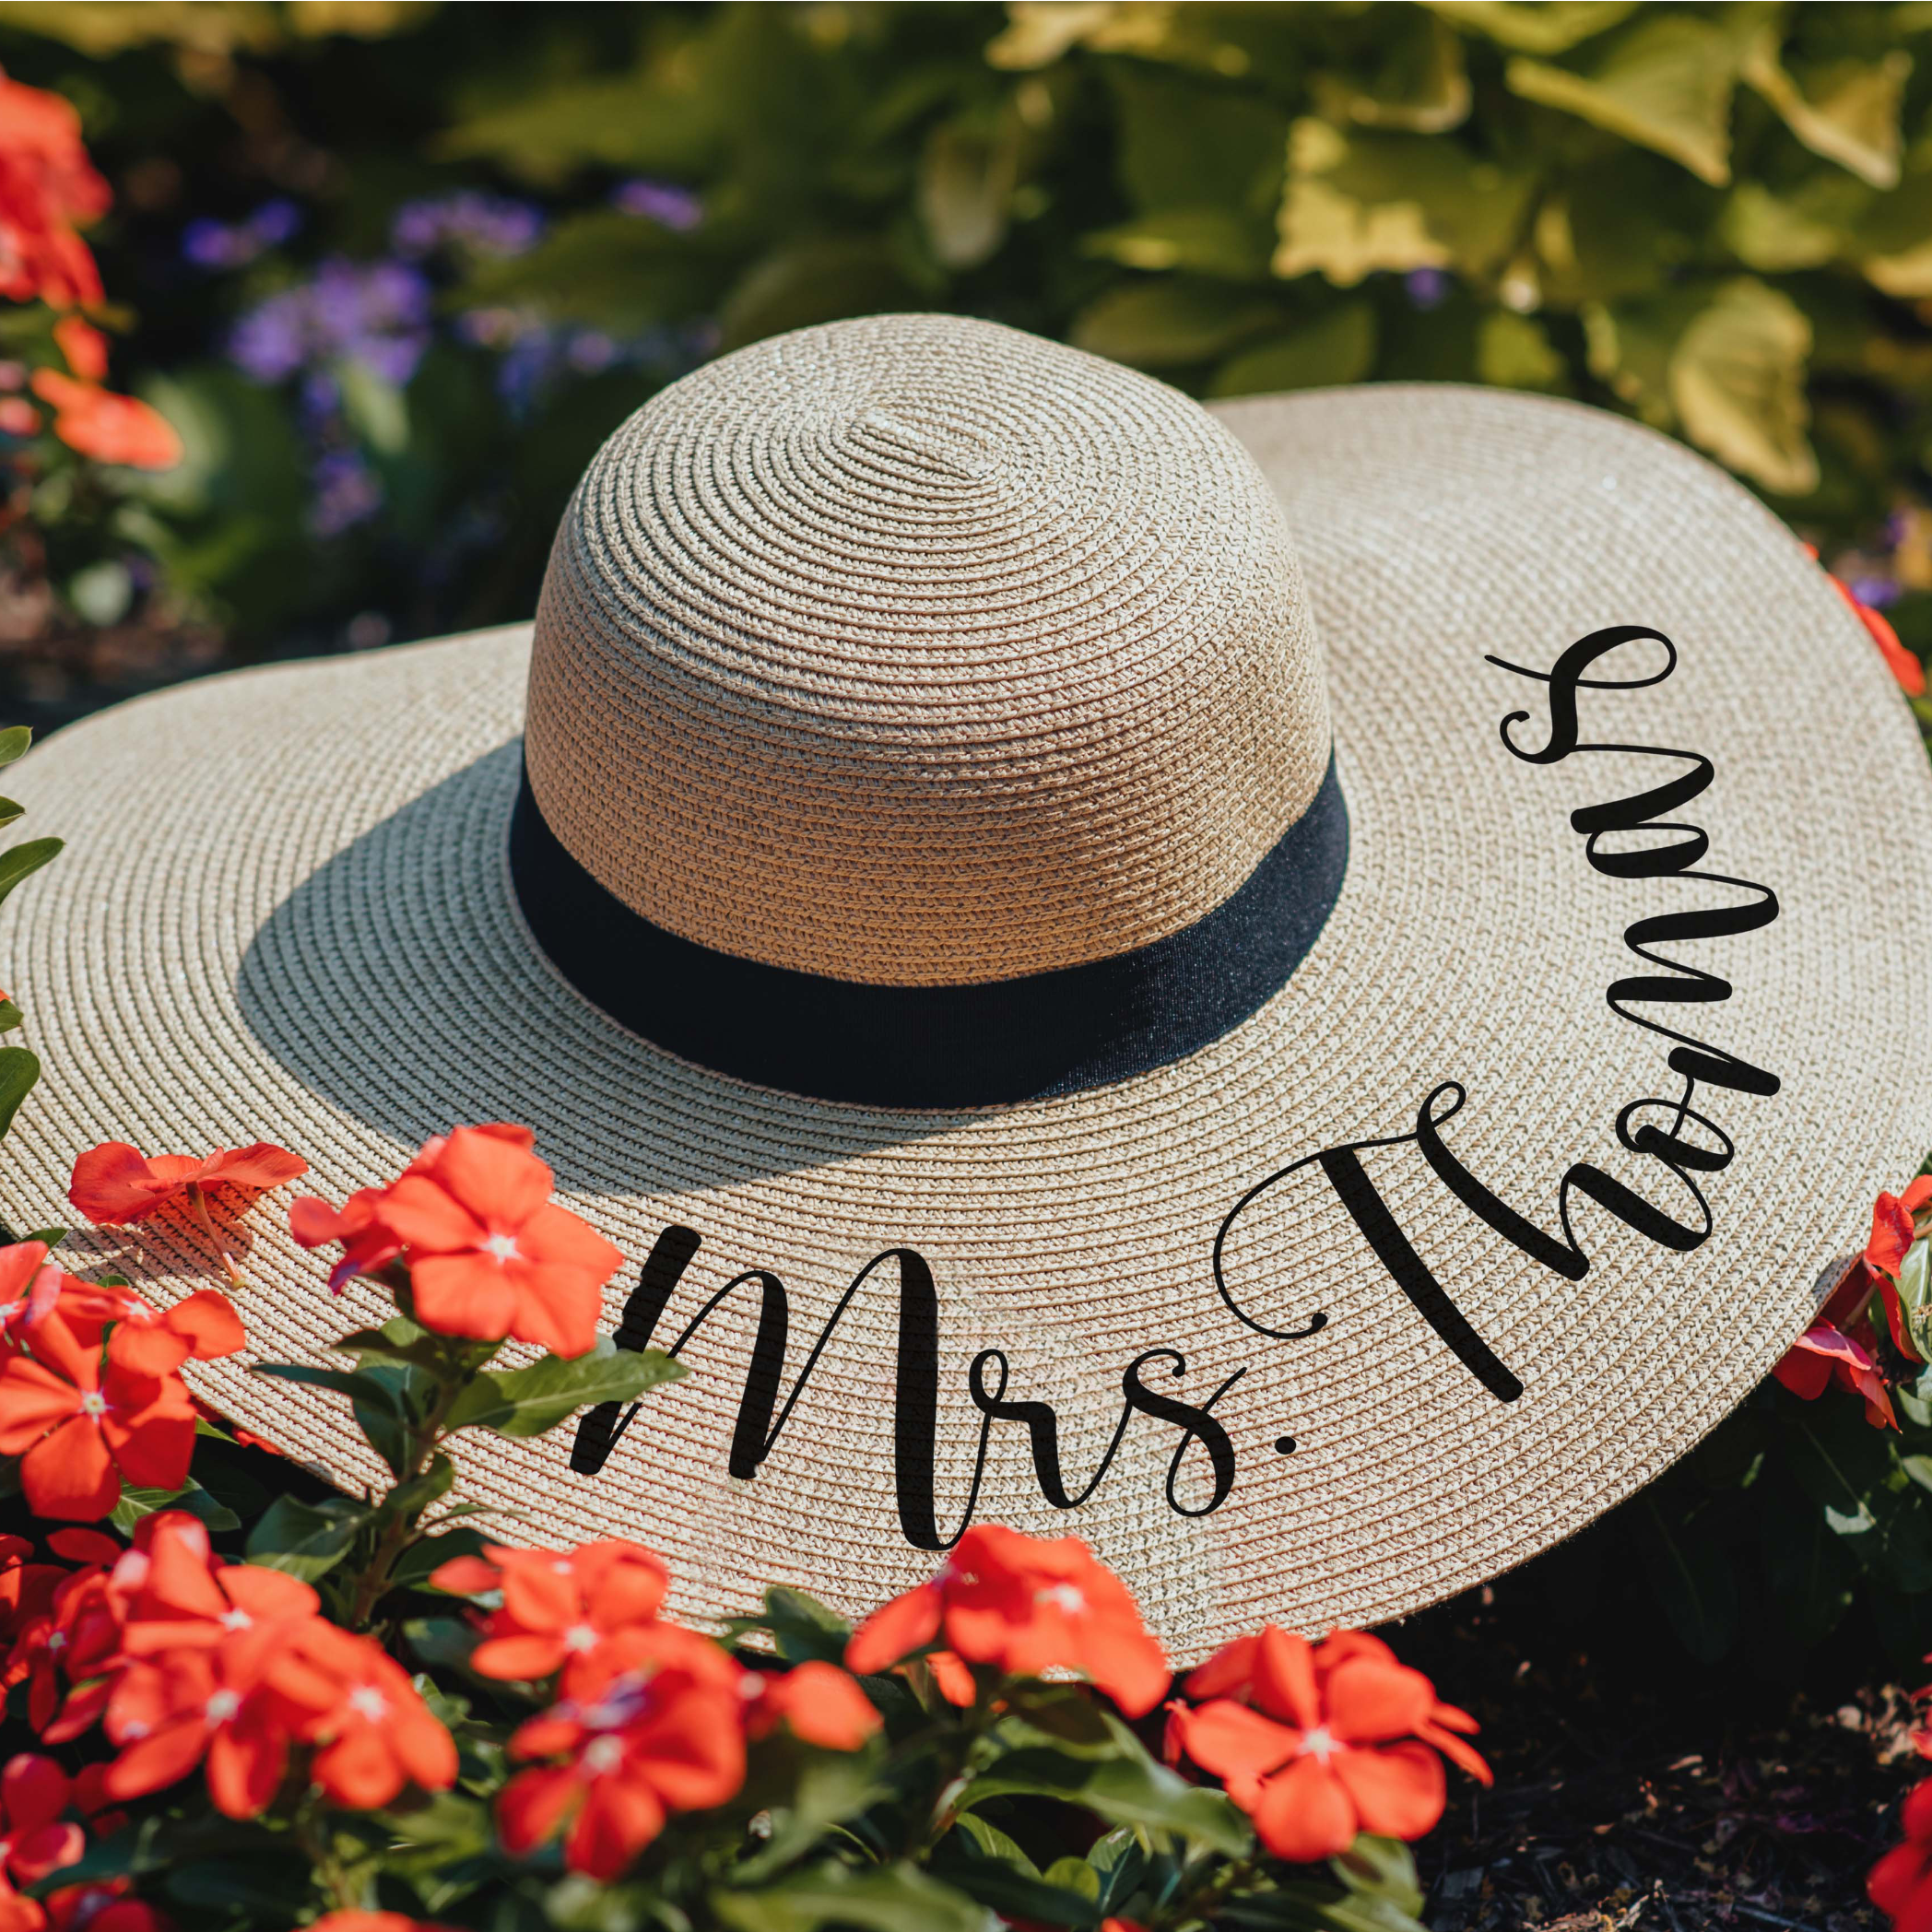 Personalized Wide Brim Straw Hat Natural Blank at Roots and Lace